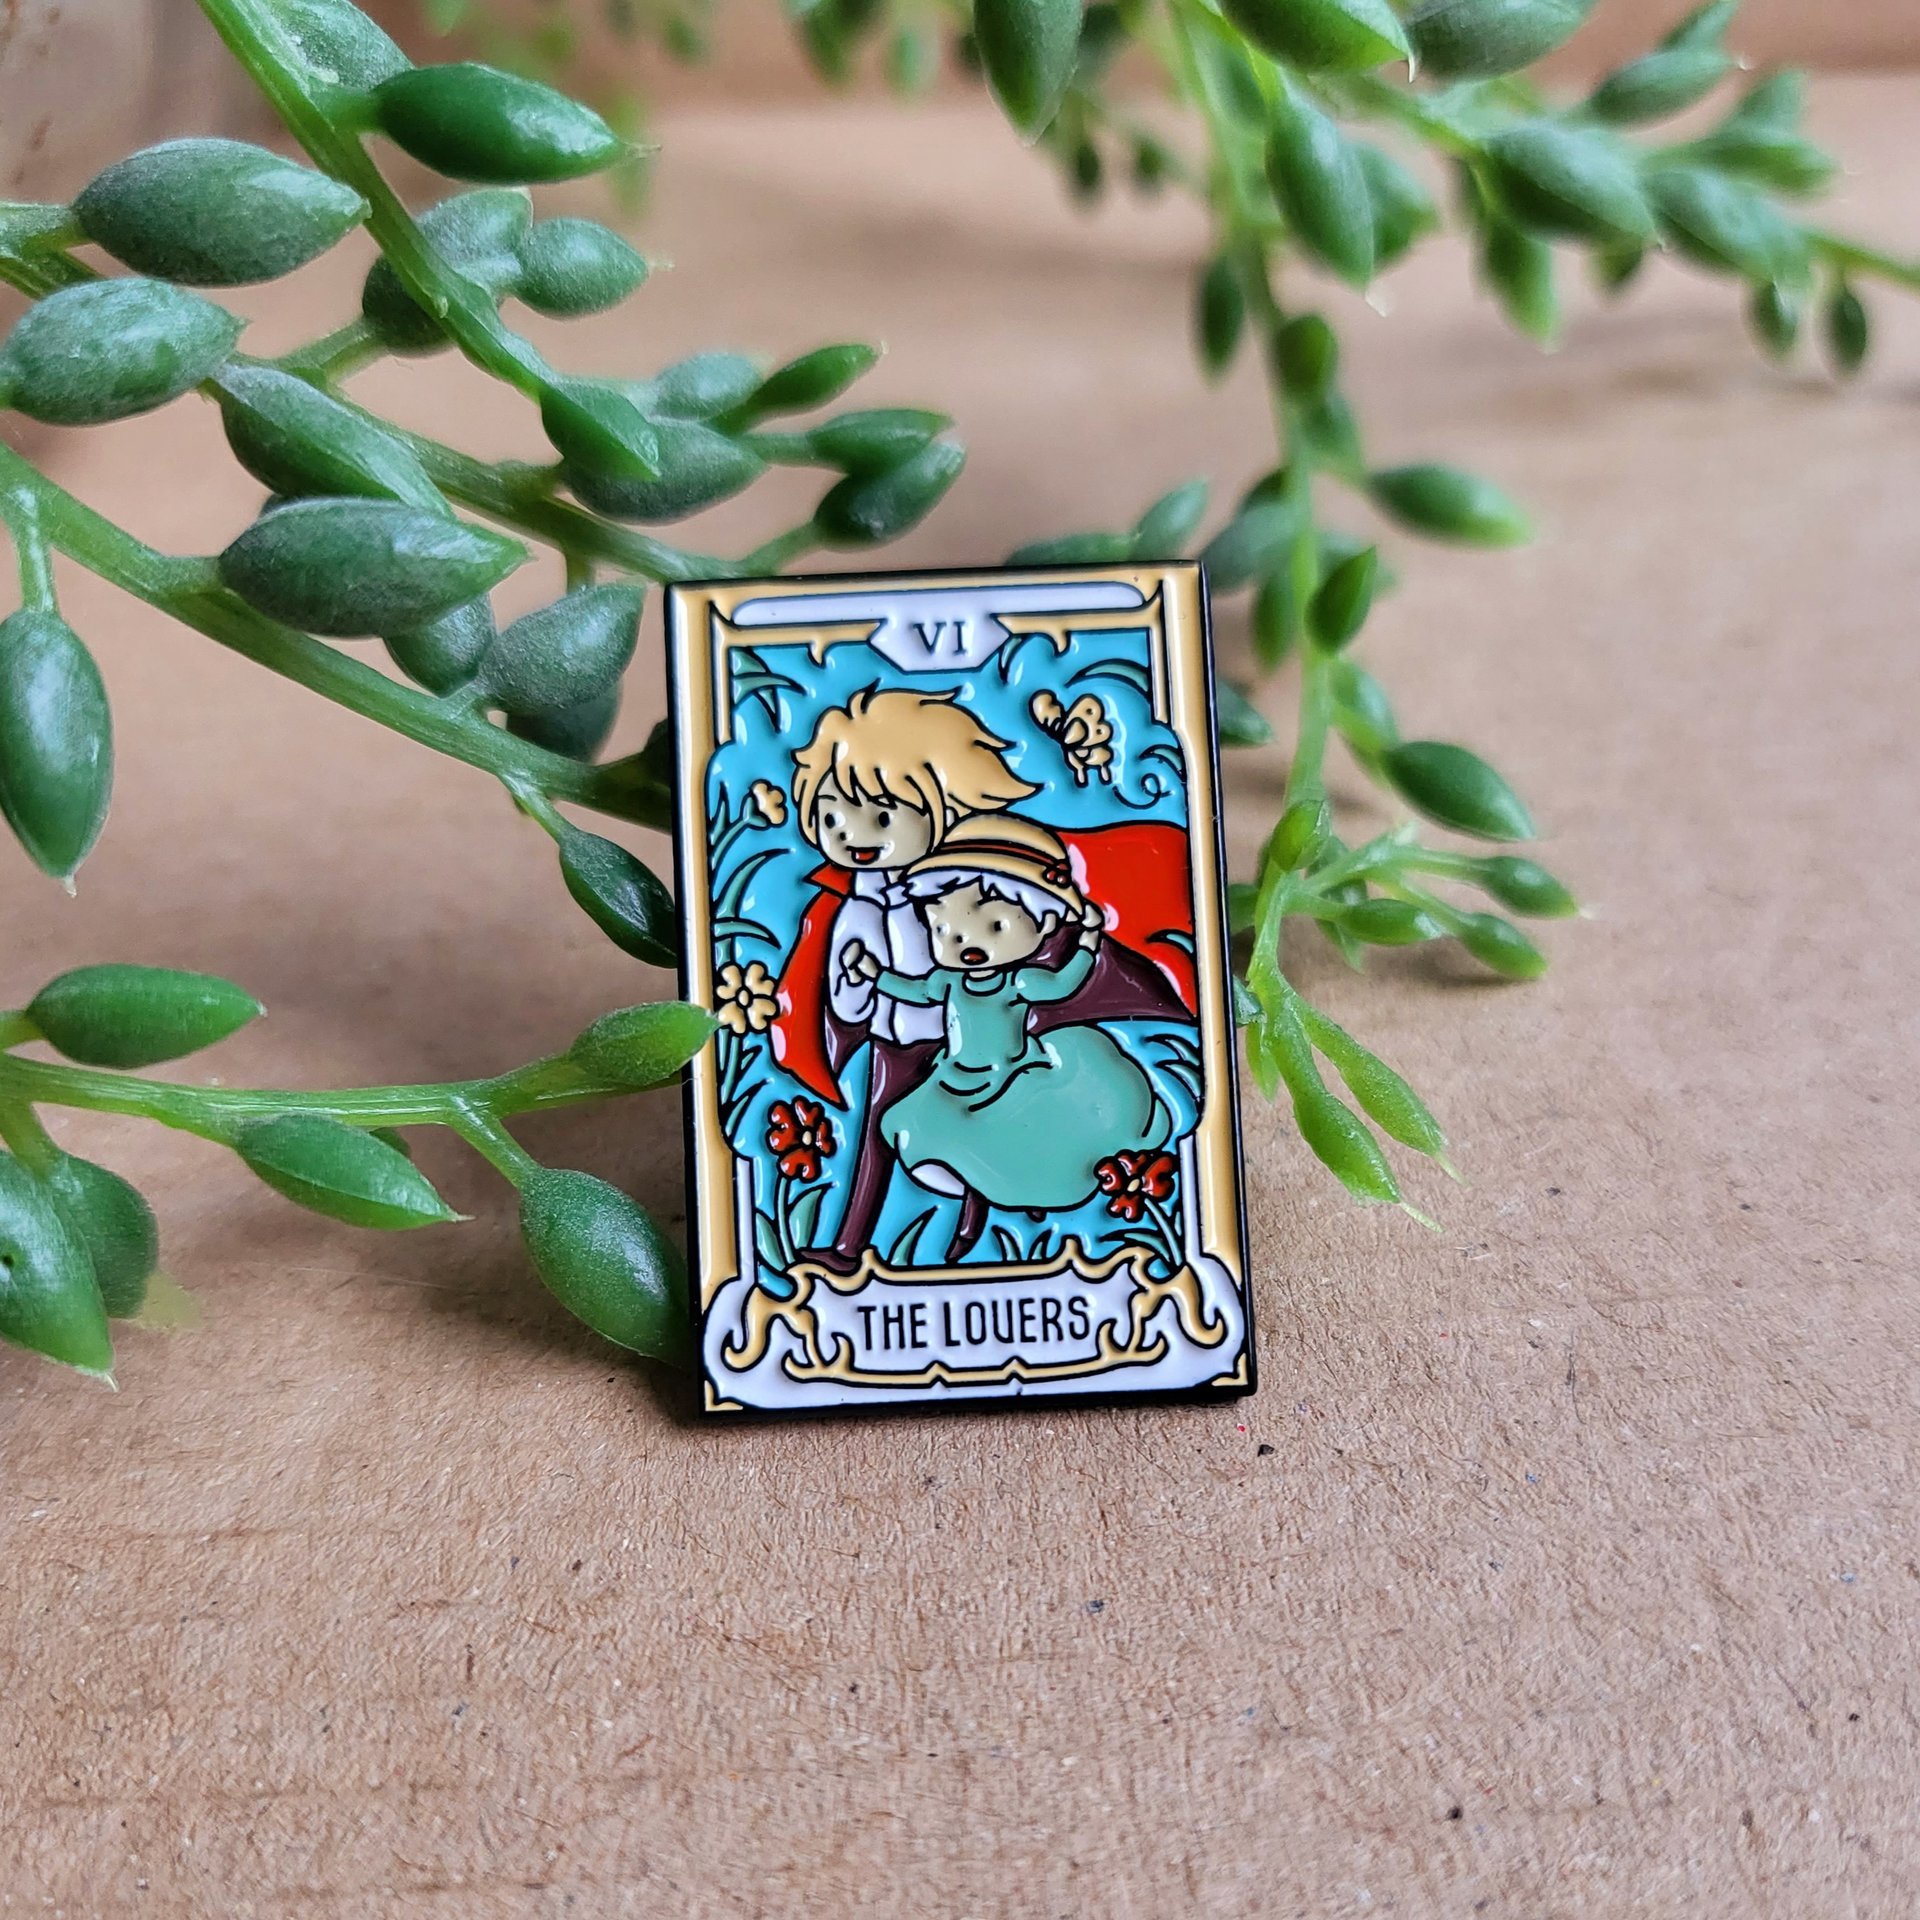 Howl's moving castle Pin badge - Lovers Tarot card